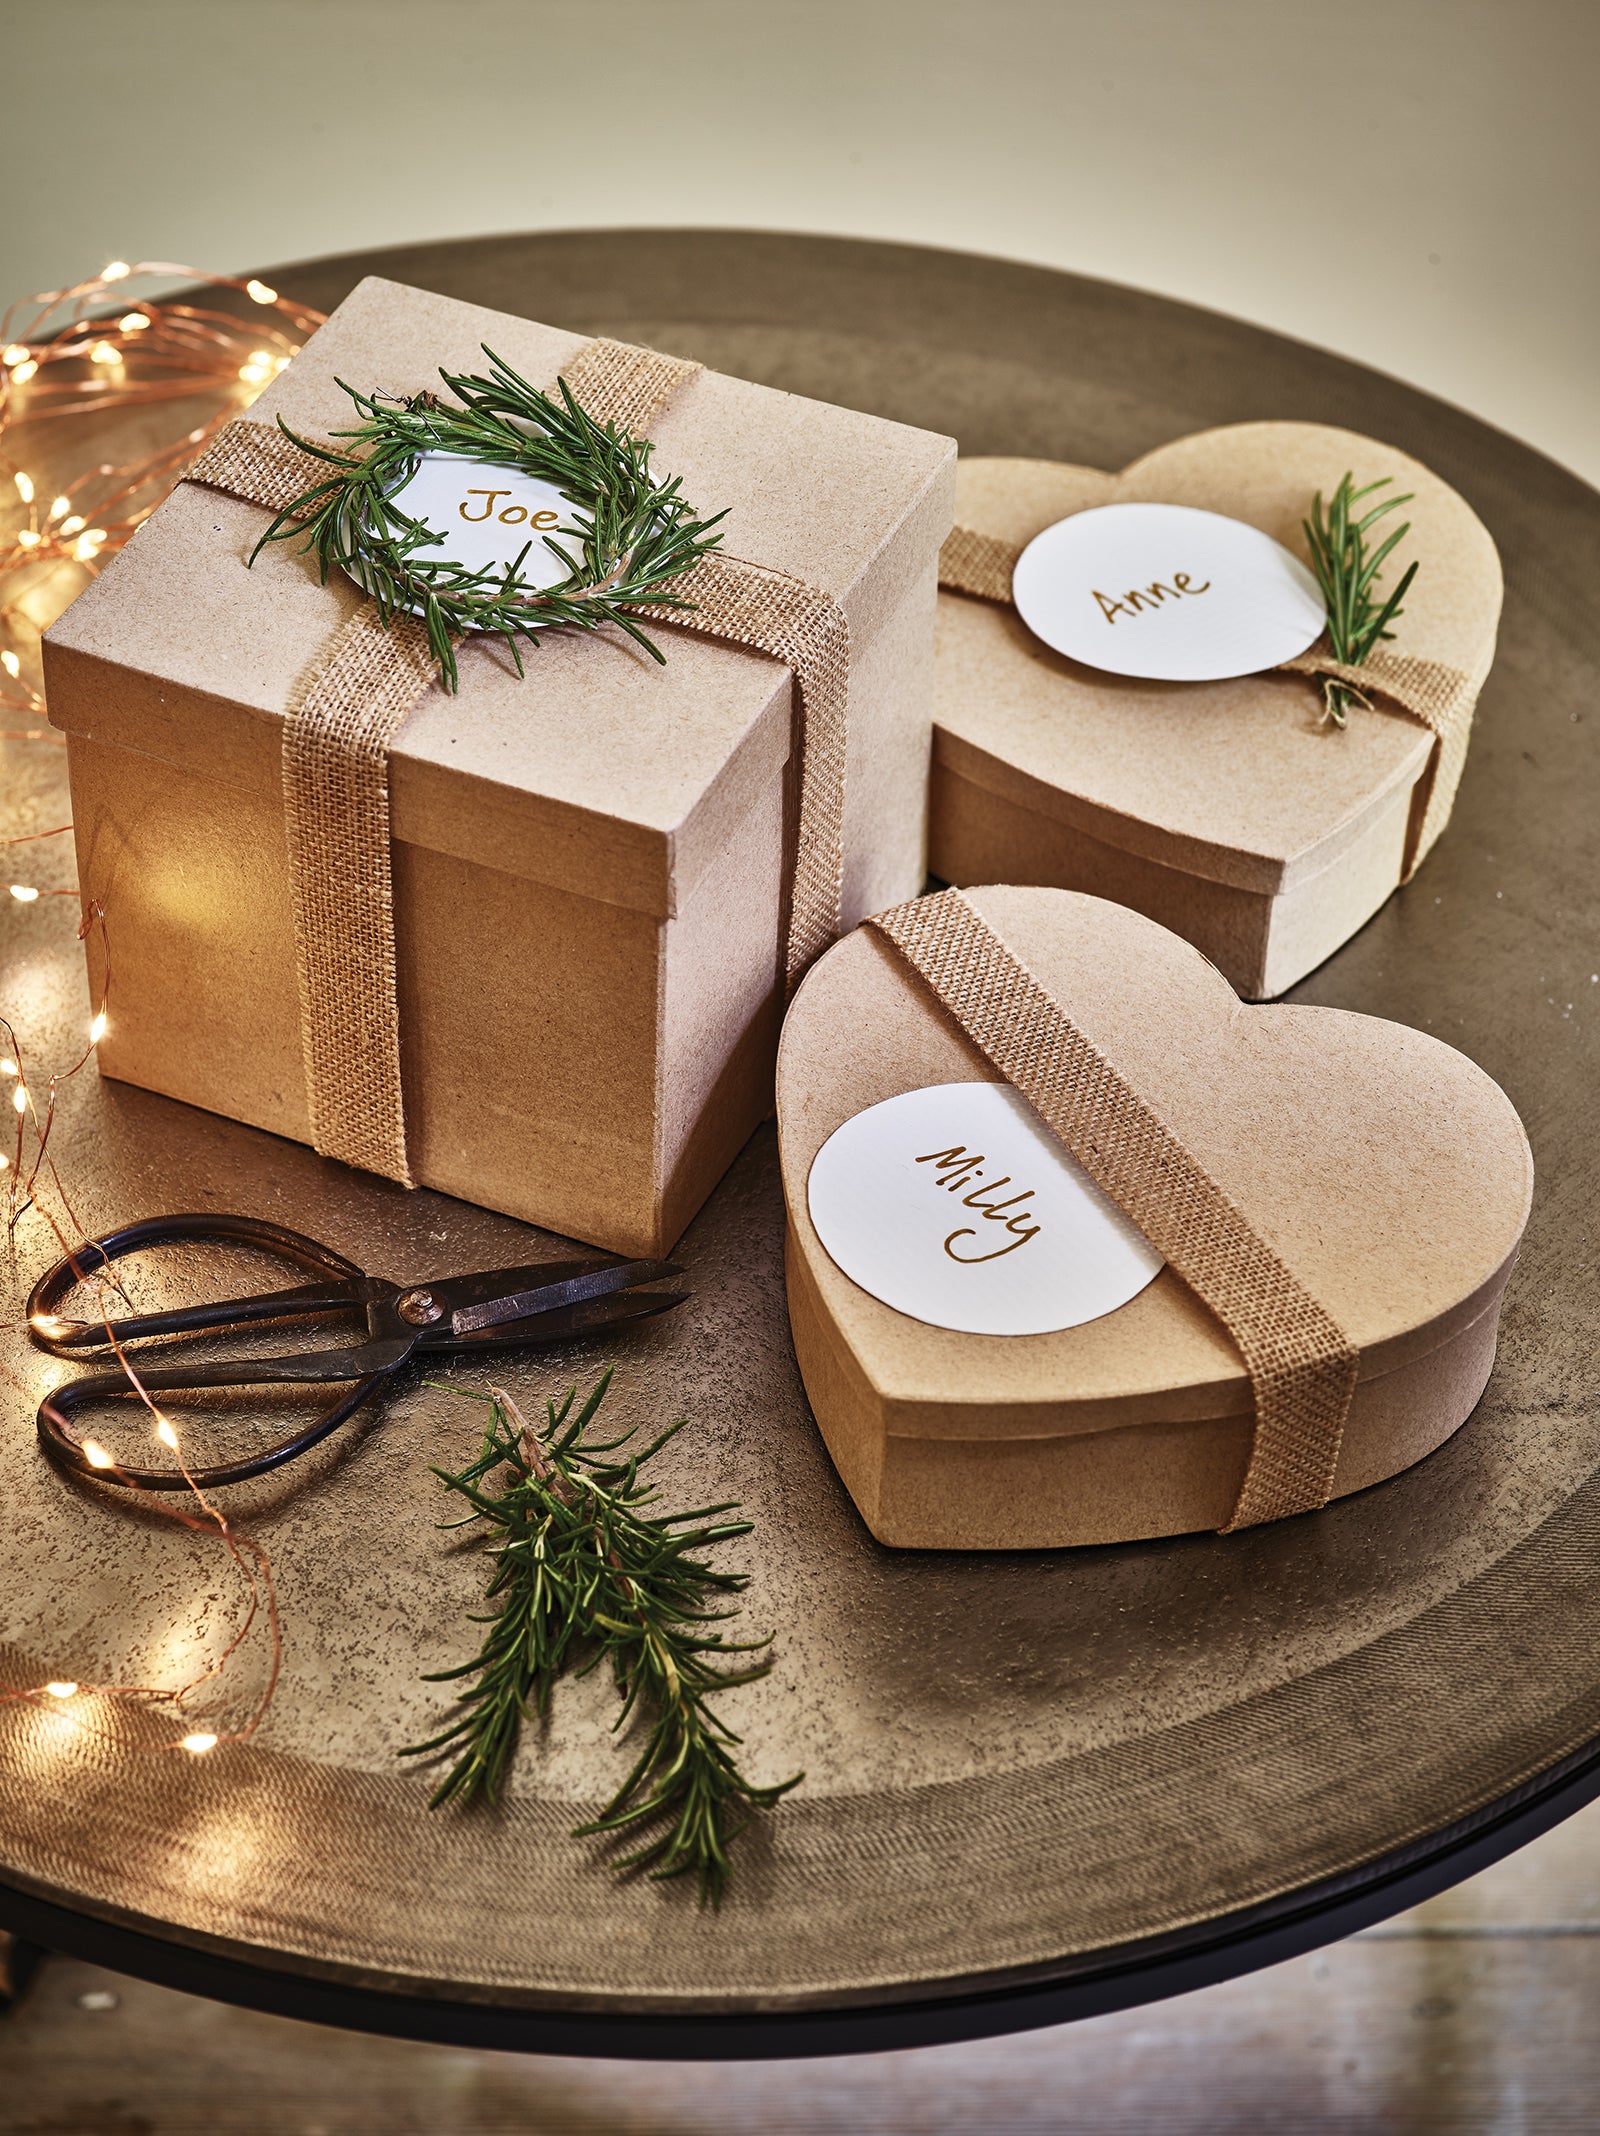 Brown gift boxes with hessian ribbons and rosemary used as foliage